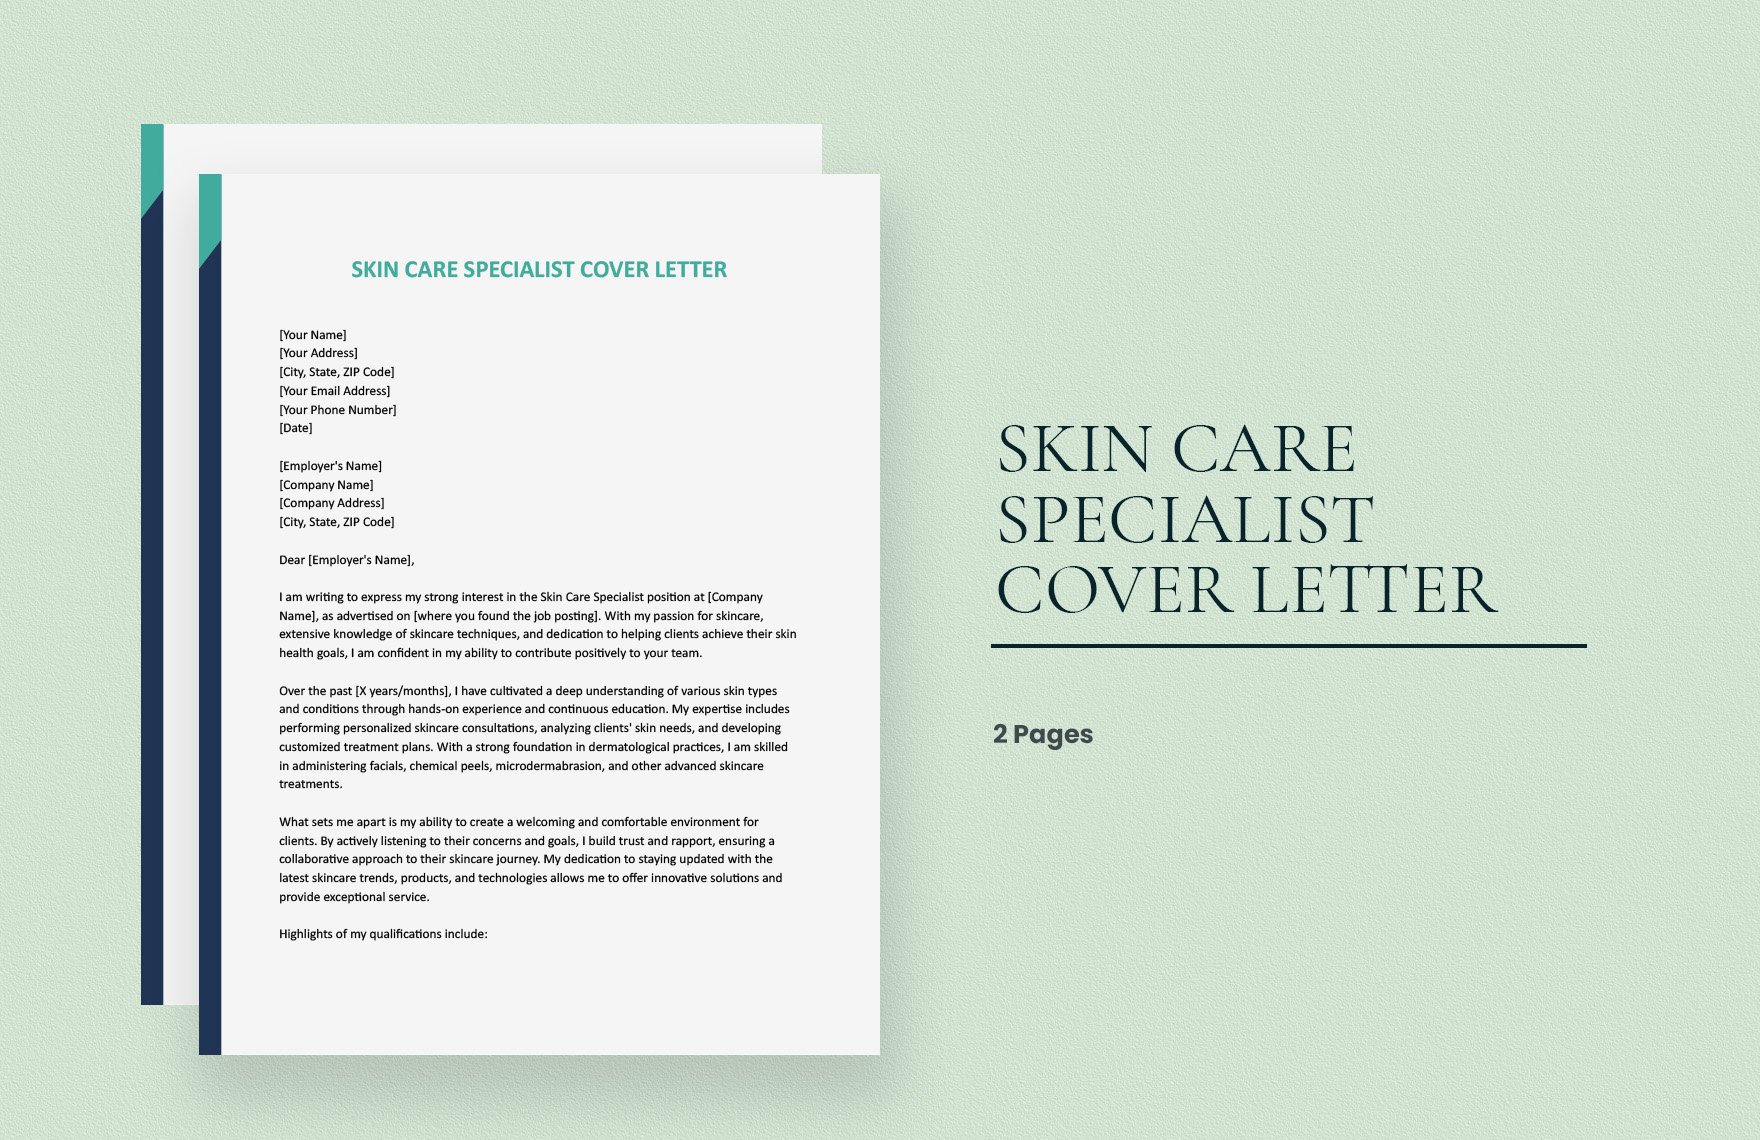 Skin Care Specialist Cover Letter in Word, Google Docs